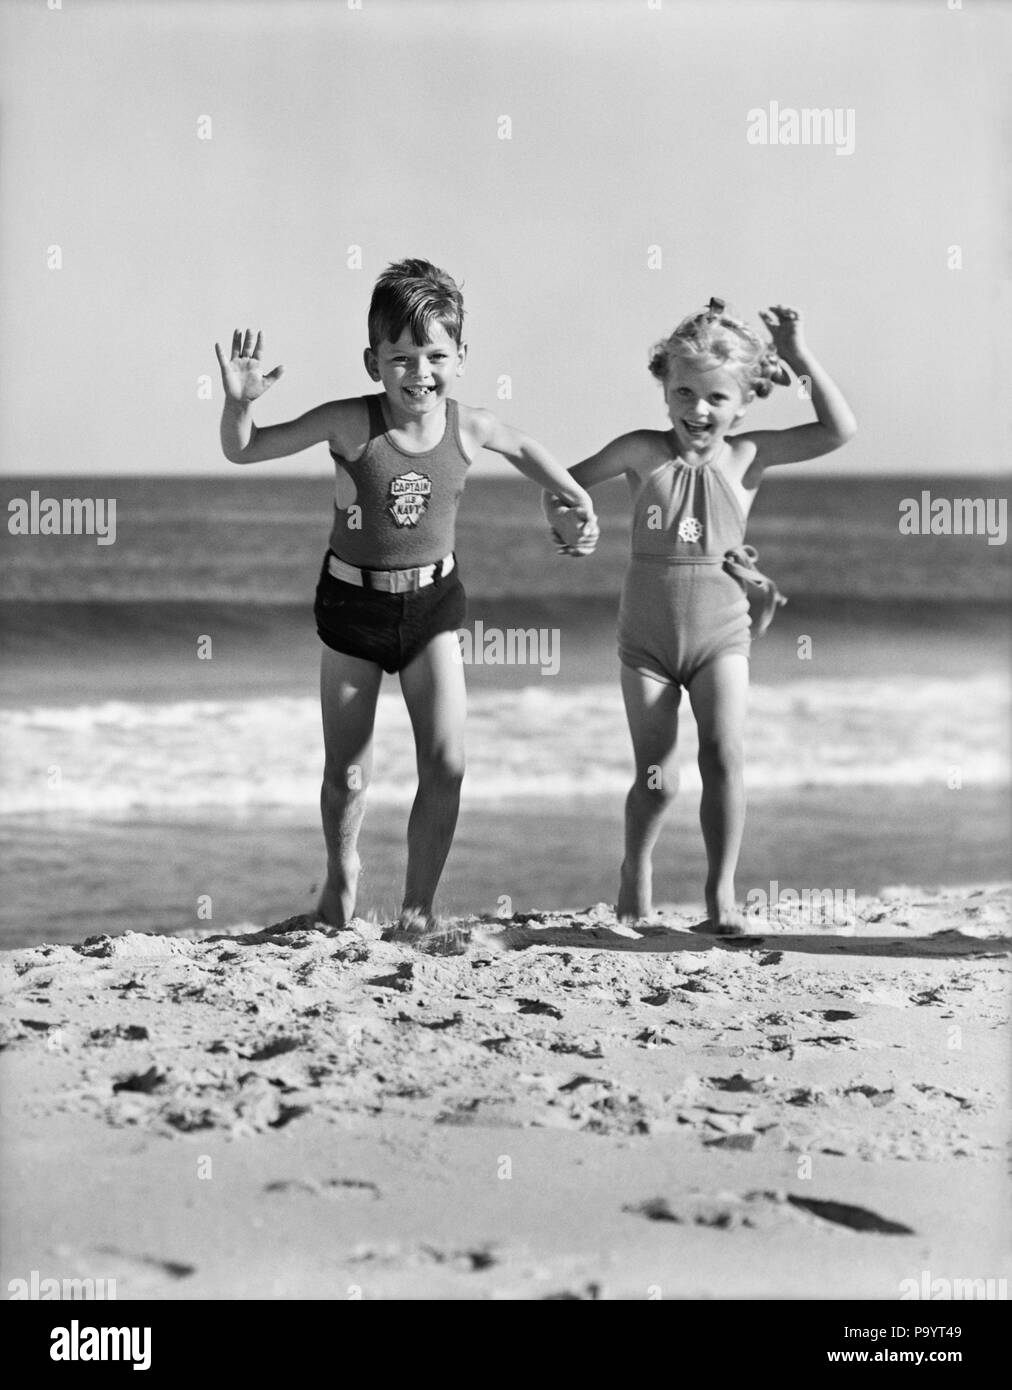 1930s TWO KIDS BOY GIRL HOLDING HANDS RUNNING ON SANDY BEACH - bx001393 CAM001 HARS FRIENDSHIP FULL-LENGTH PERSONS MALES SIBLINGS SURF SISTERS B&W SUMMERTIME EYE CONTACT SHORE HAPPINESS EXCITEMENT RECREATION CAM001 HOLDING HANDS SIBLING SANDY BATHING SUIT SWIM WEAR GROWTH JUVENILES SEASHORE TOGETHERNESS BLACK AND WHITE CAUCASIAN ETHNICITY OLD FASHIONED Stock Photo